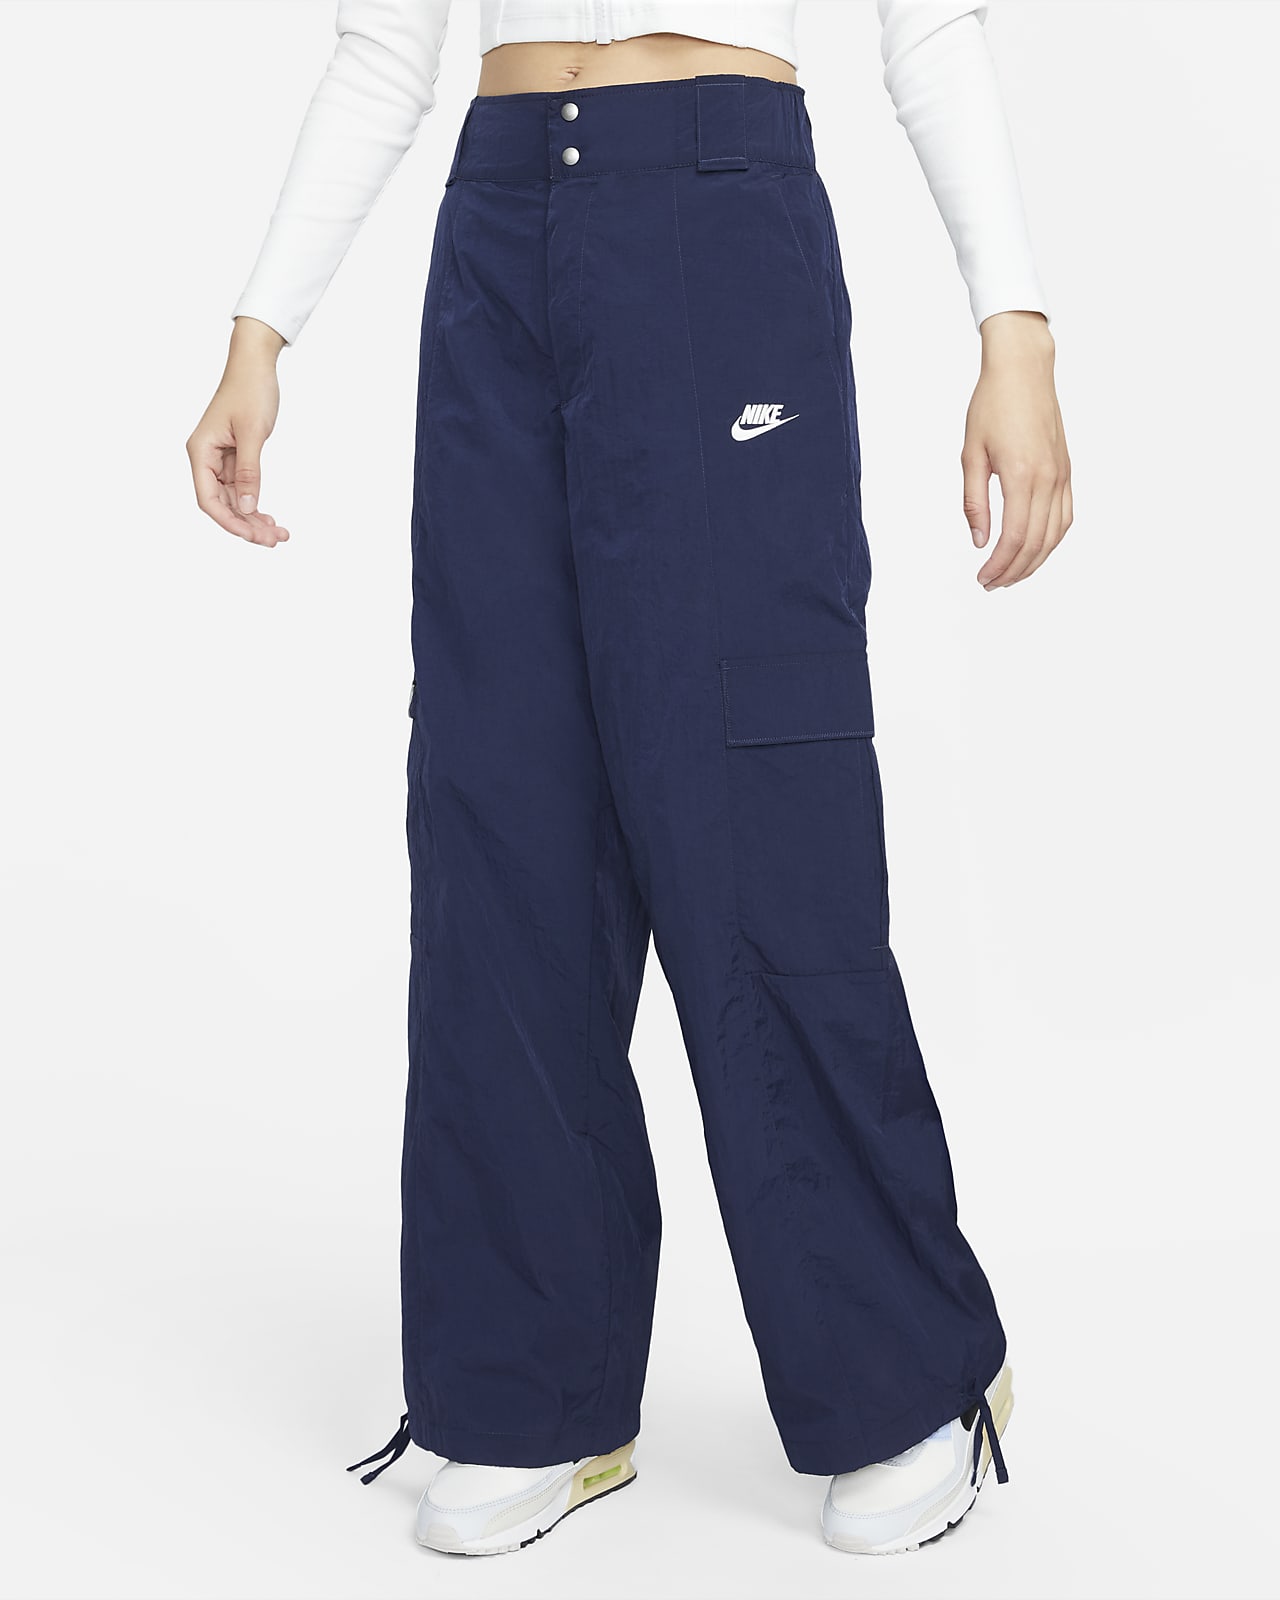 https://static.nike.com/a/images/t_PDP_1280_v1/f_auto,q_auto:eco/b5c4deea-5916-487f-a744-580d67f8ef76/sportswear-oversized-high-waisted-woven-cargo-trousers-dXSgqw.png